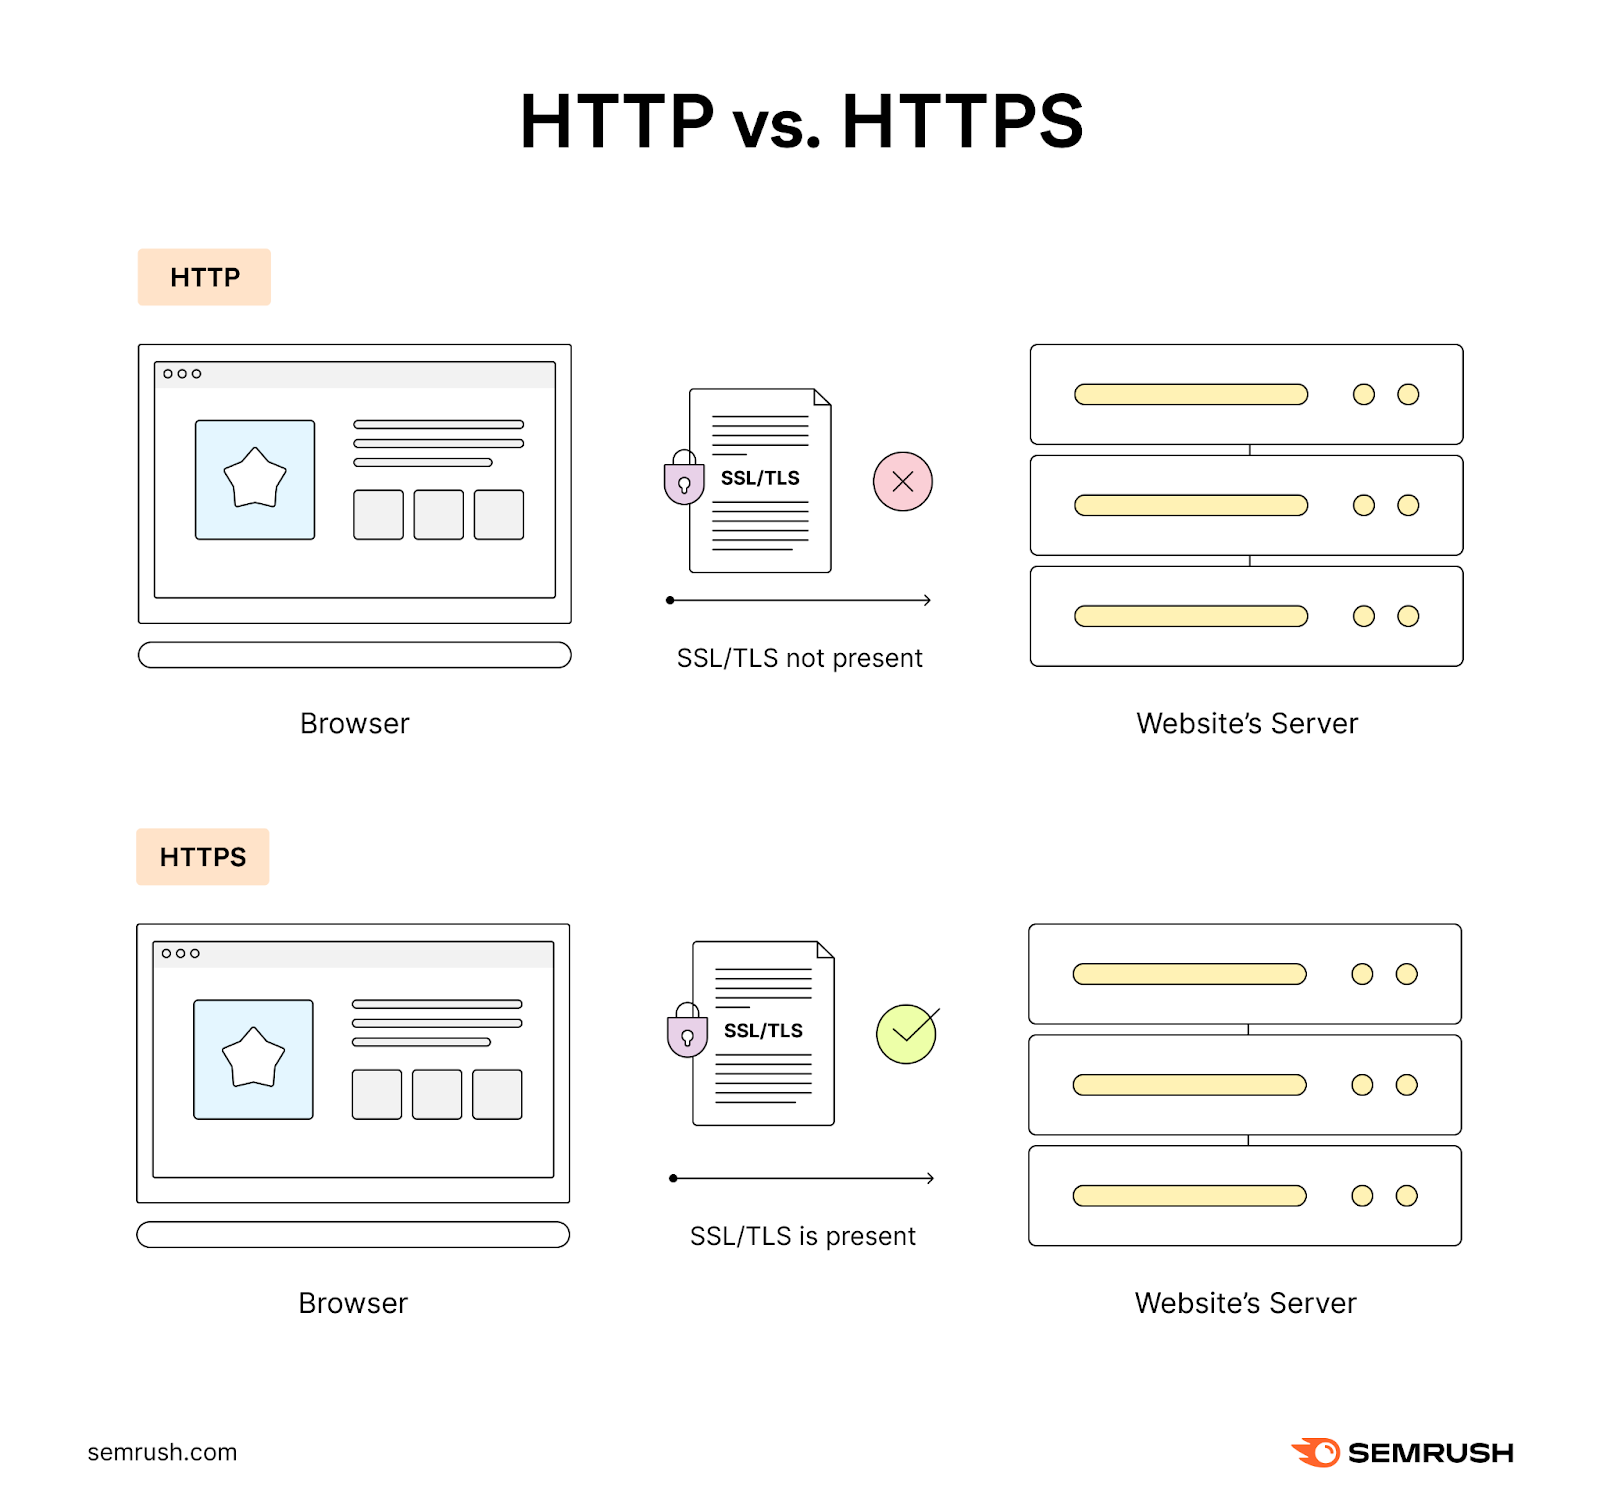 In HTTPS connection  SSL/TLS certificate proves a website’s individuality  and authenticity